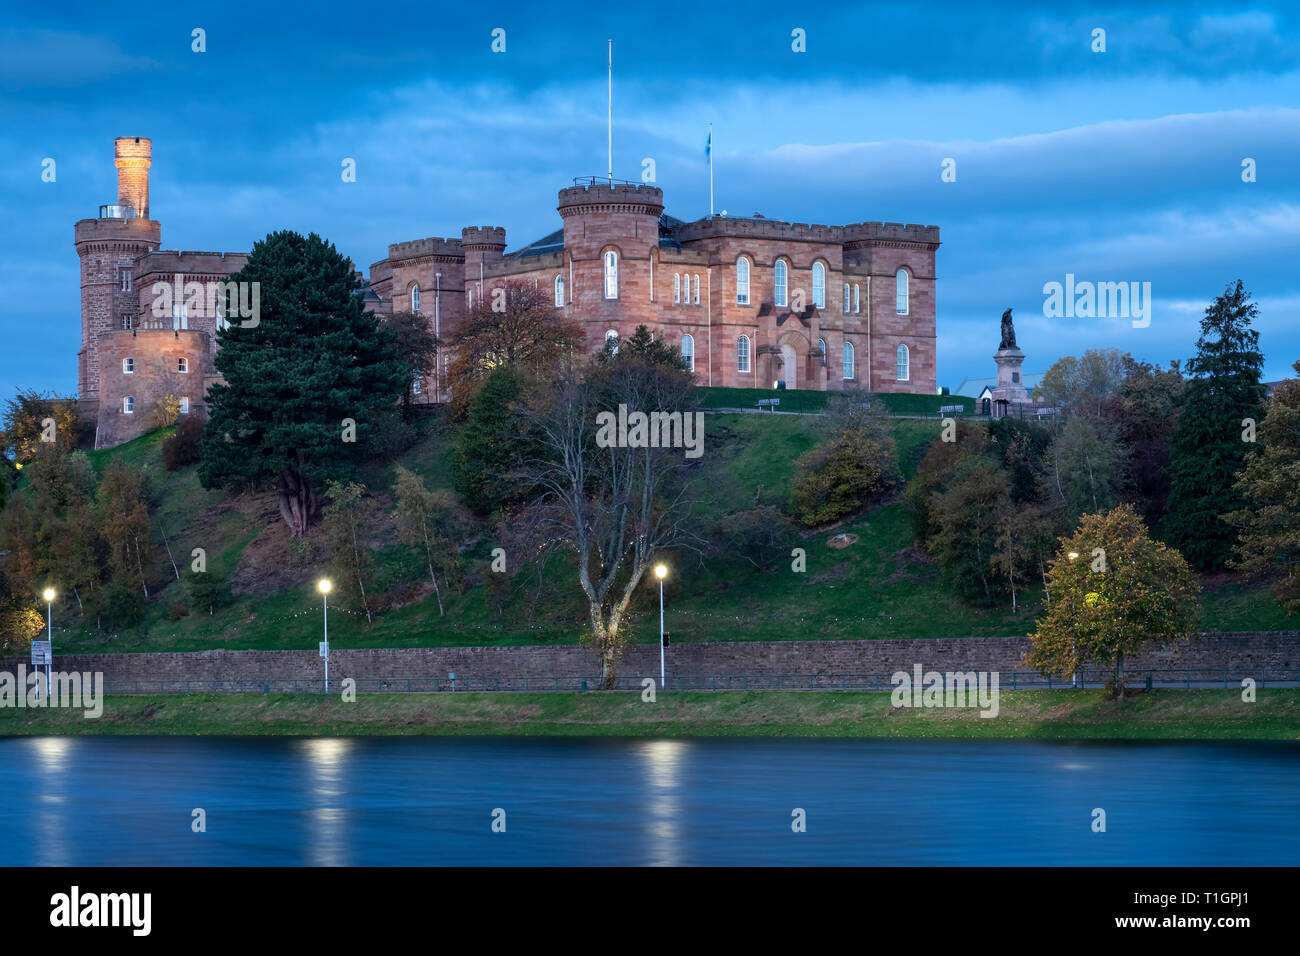 Inverness Castle and the River Ness at night, Inverness, Scottish Highlands, Scotland, UK Stock Photo